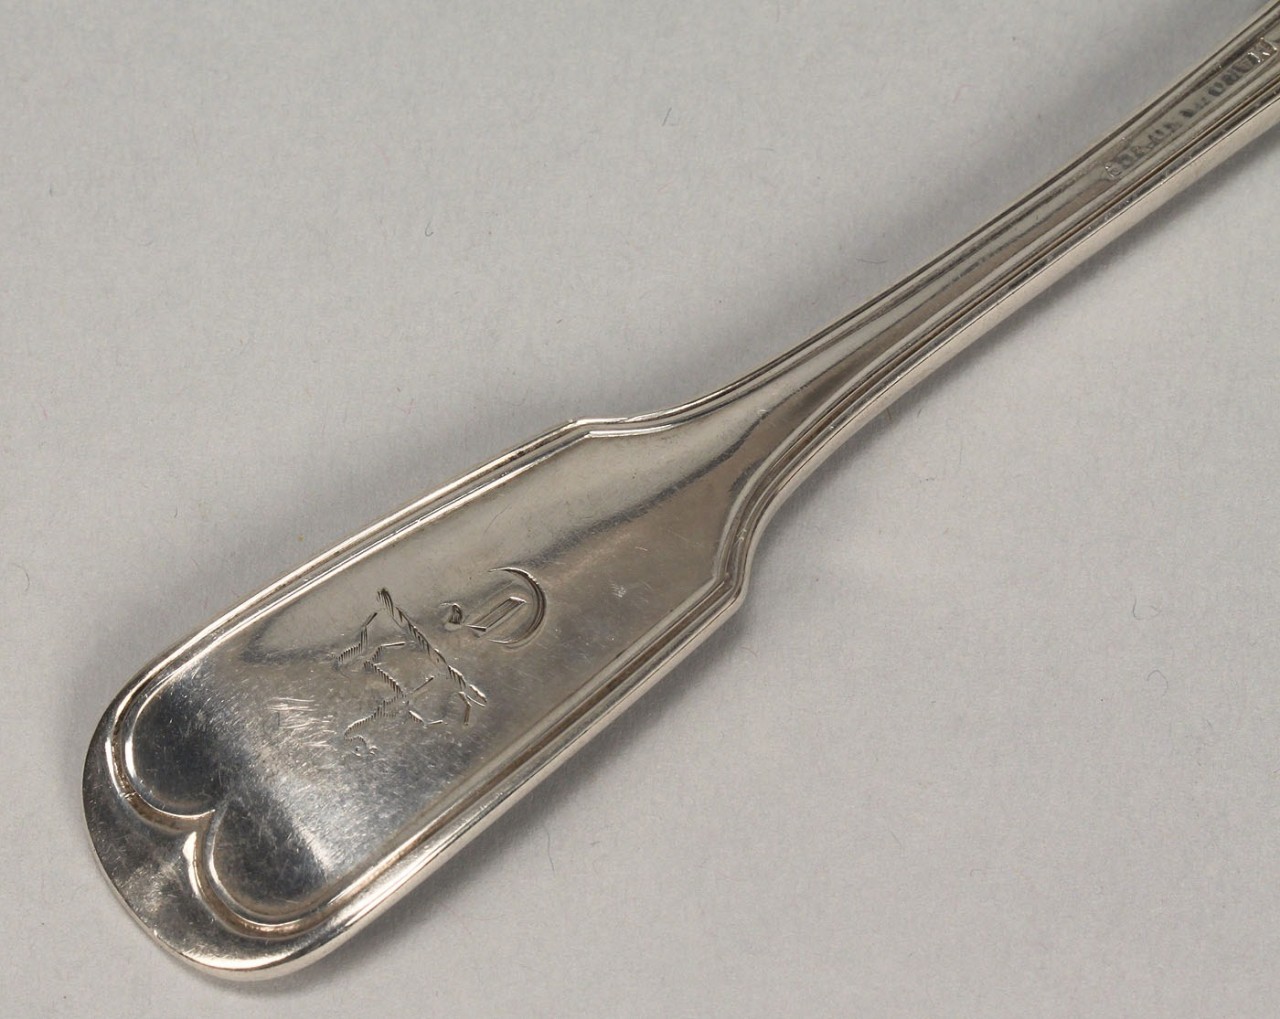 Lot 254: 13 American Coin Silver Forks Marquand, Wilson